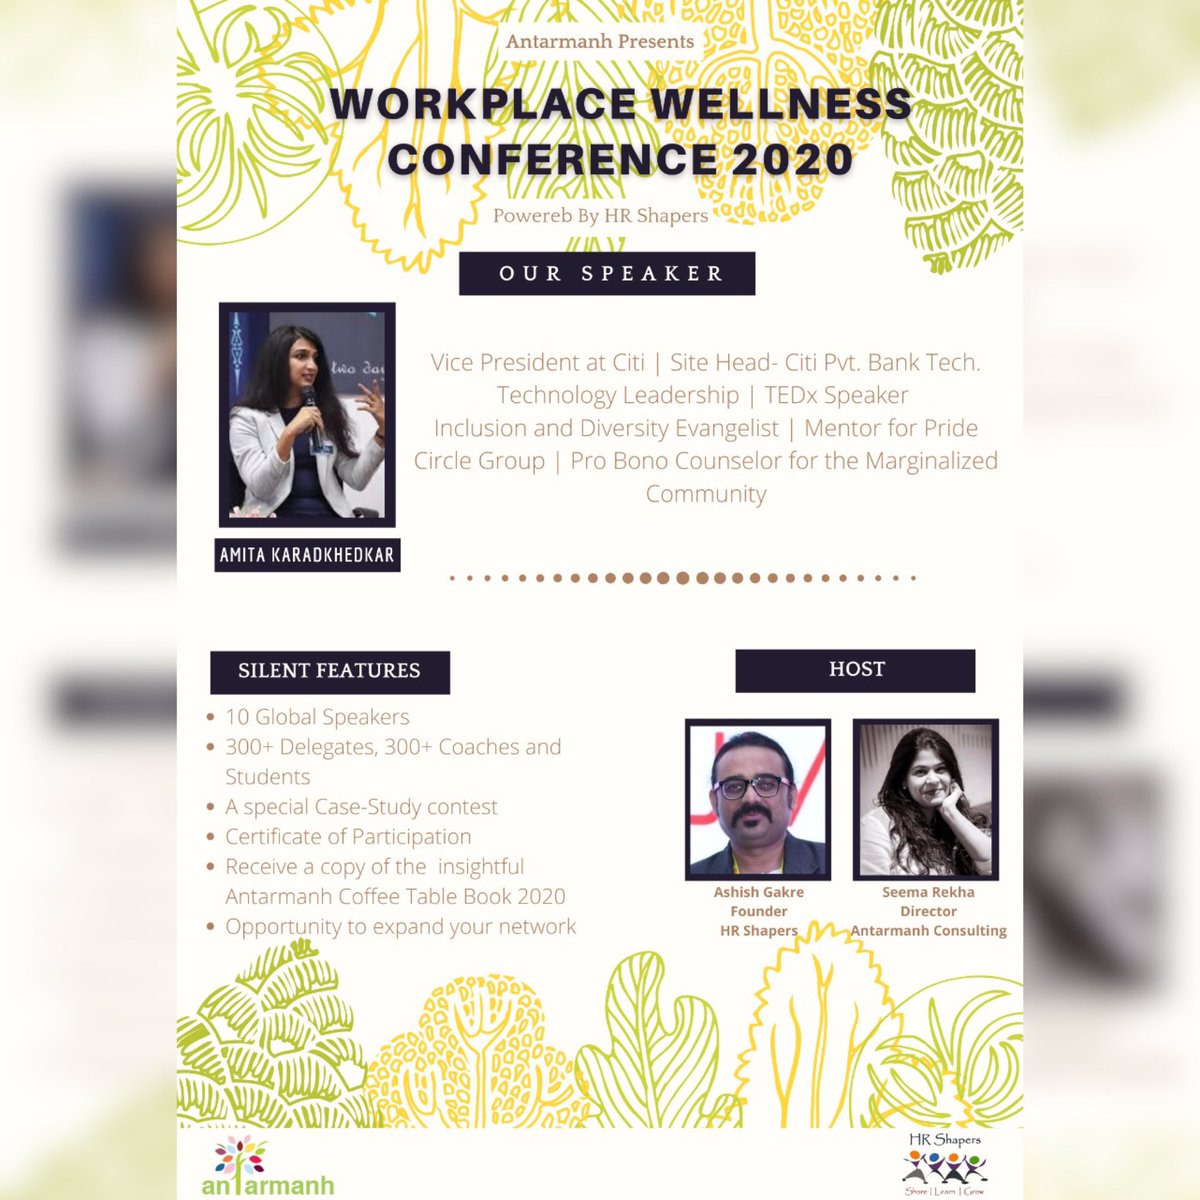 Join us on the journey to Corporate Wellness with our estimated speaker Ms. Amita Karadkhedkar. 
We are pleased to invite you to our Workplace Wellness Conference 2020. 

#AntarmanhConference #antarmah #hrshapers #health #corporate #corporatewellness #mentalhealth